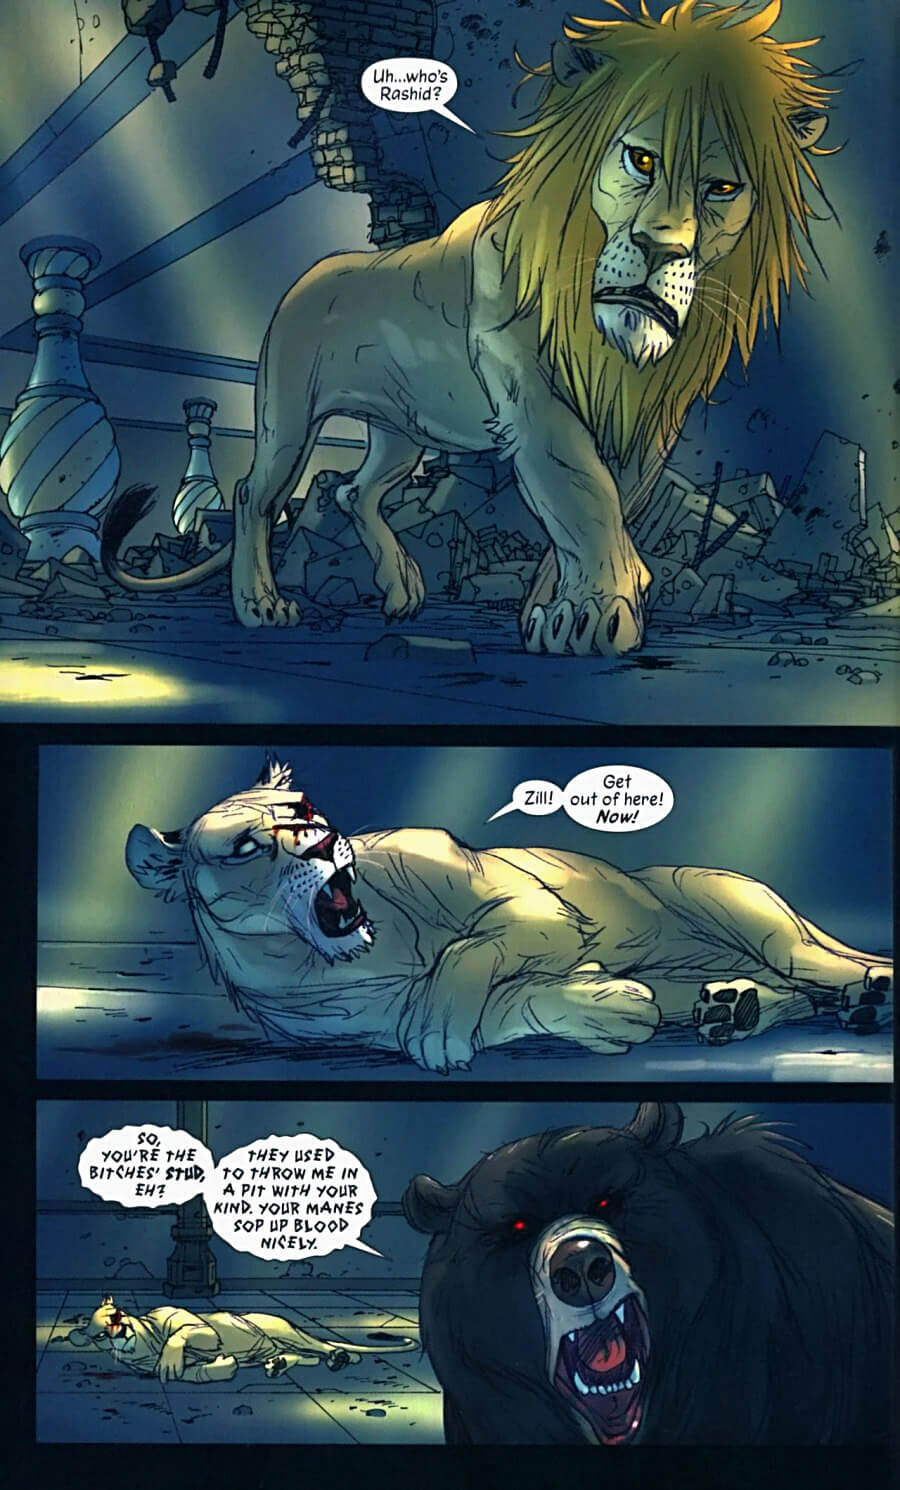 page 91 of pride of baghdad graphic novel